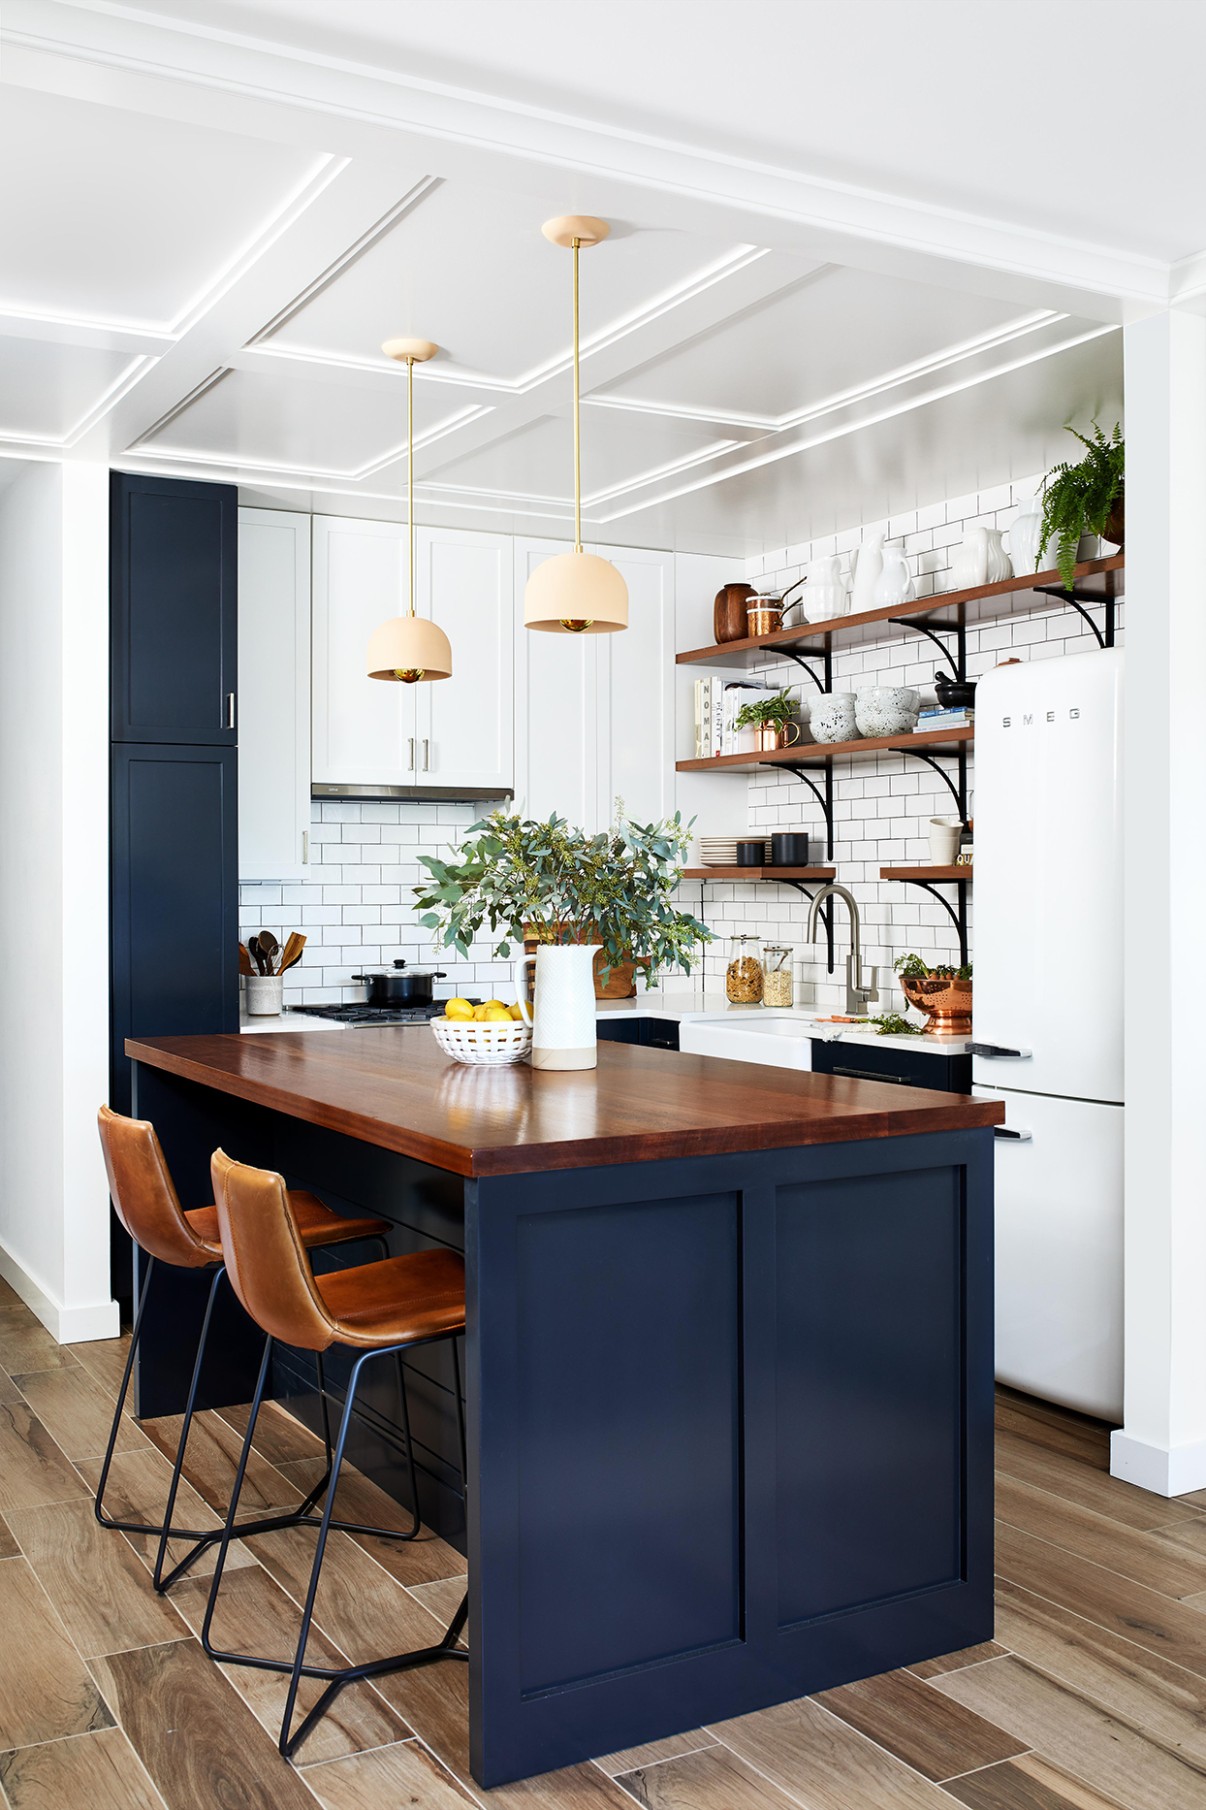 8 Small Kitchen Color Ideas for a Big Boost of Style  Better  - what is a good color for a small kitchen?